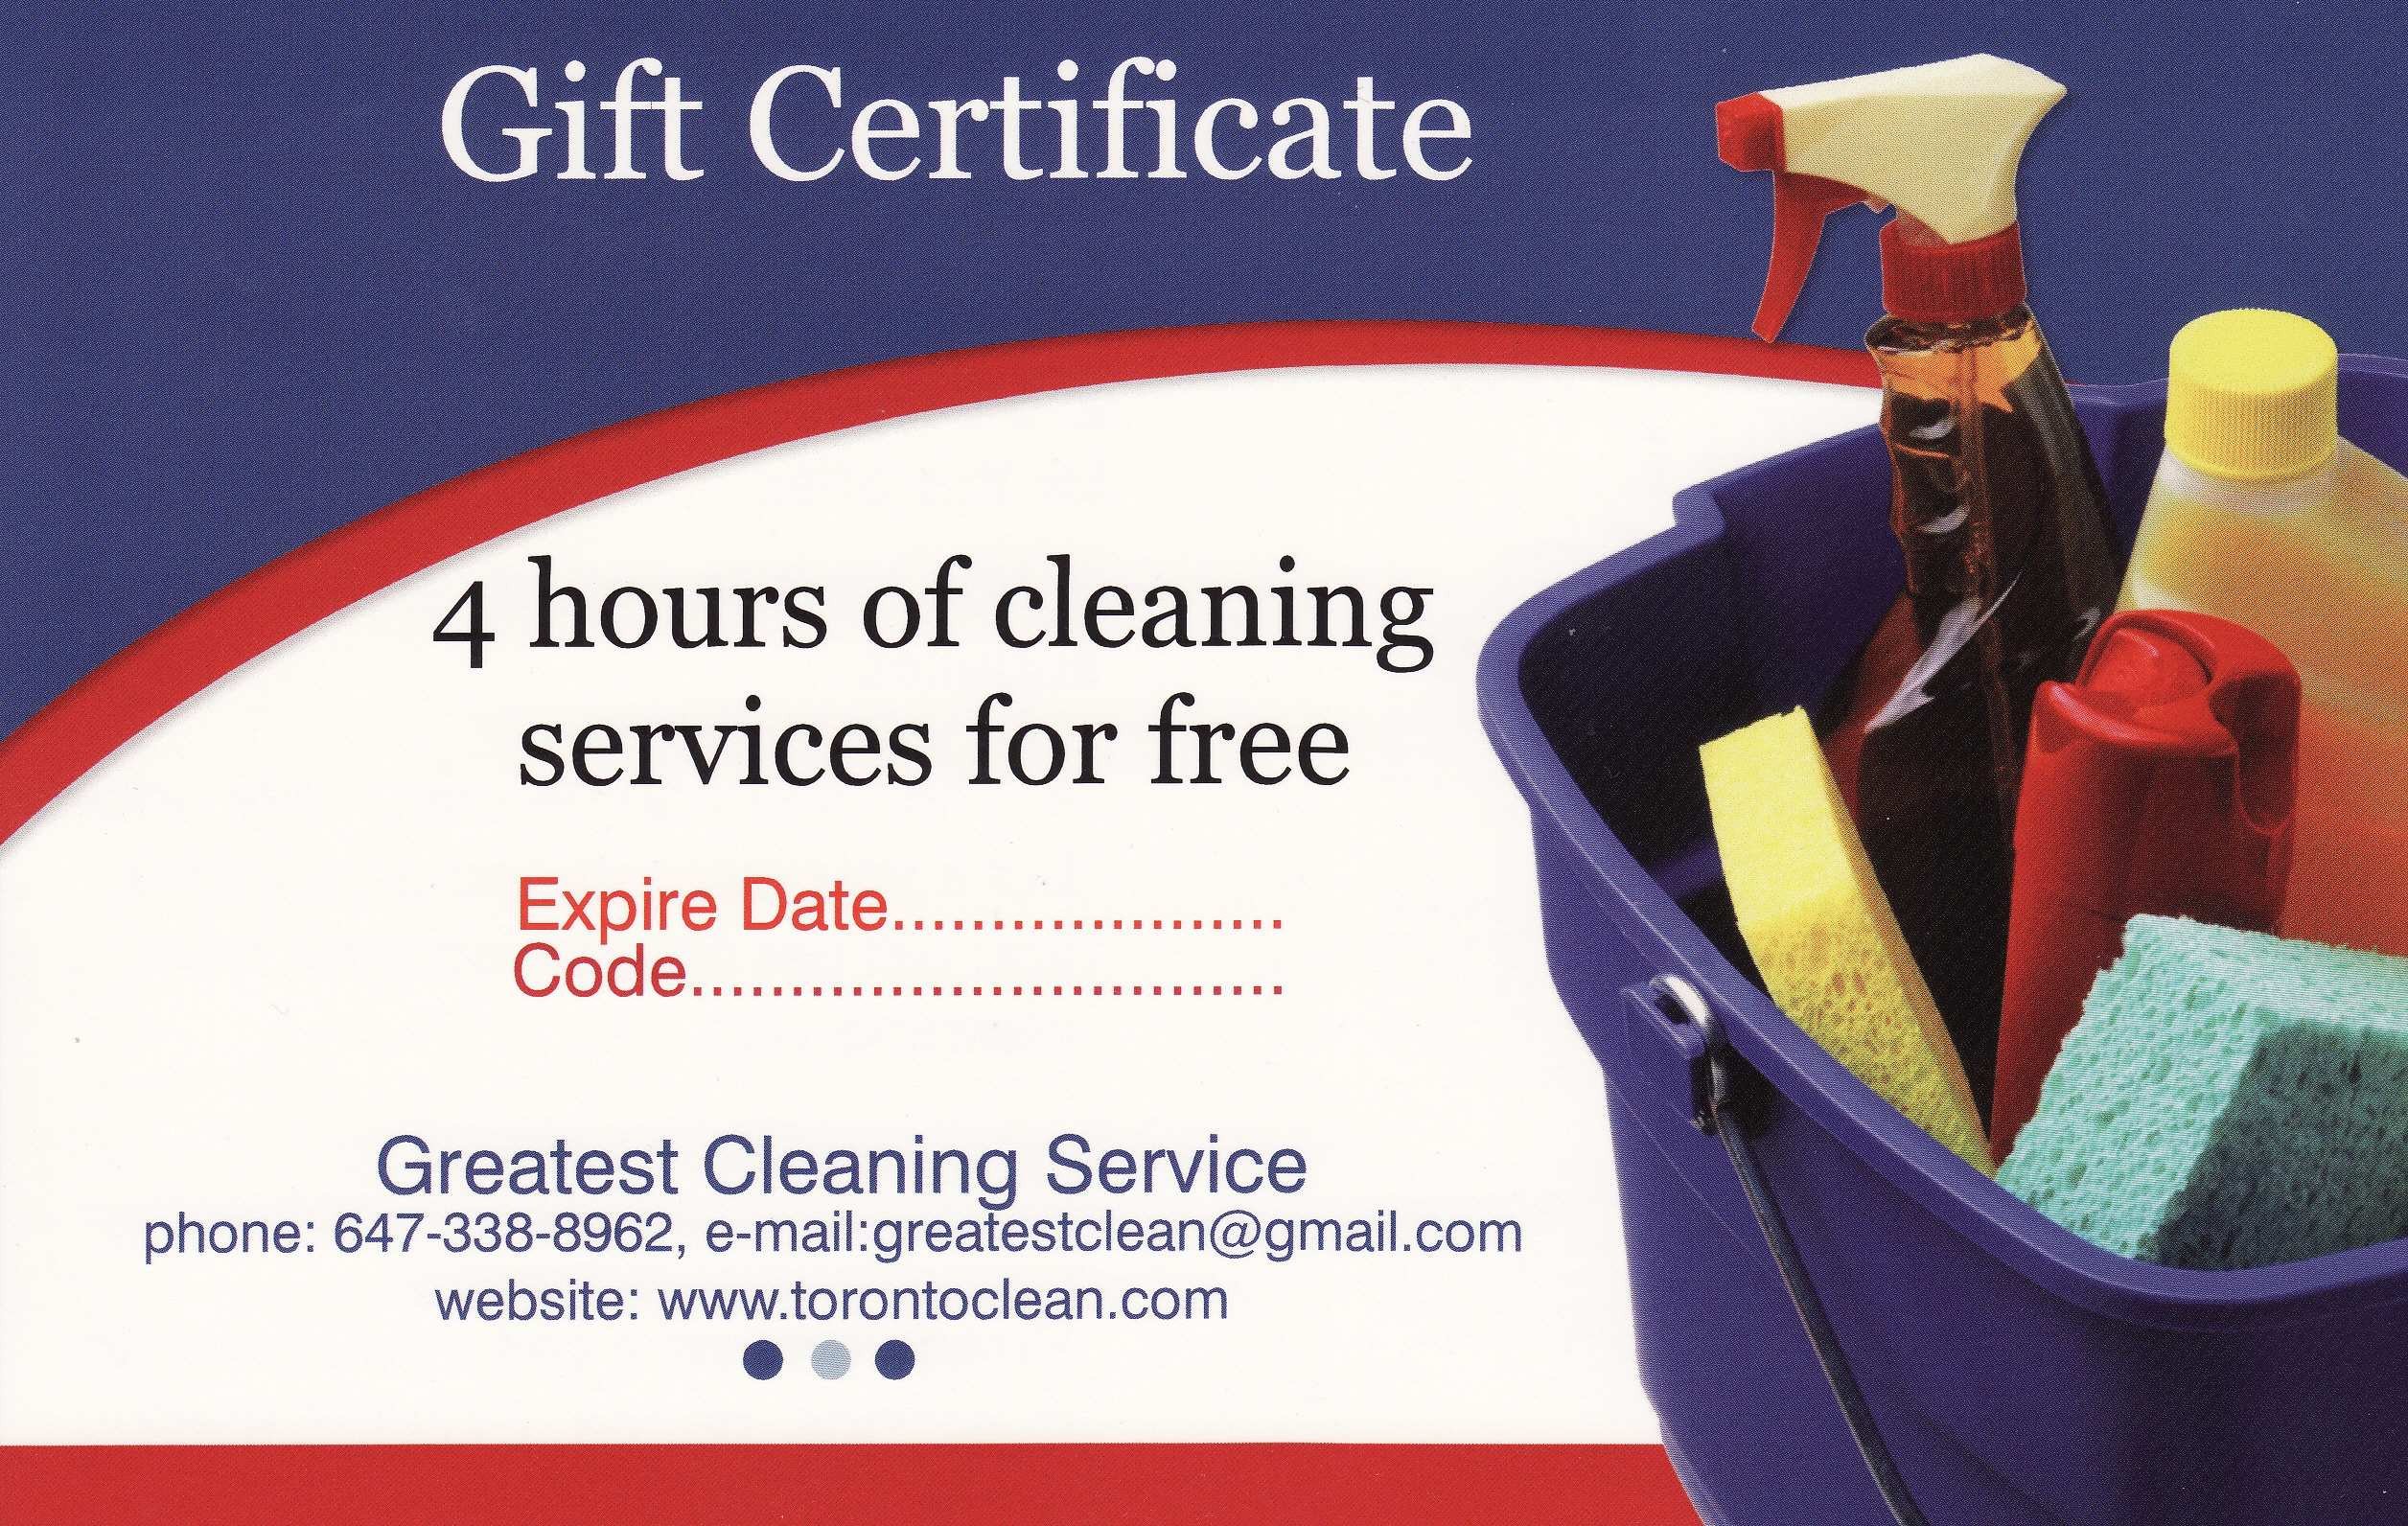 House Cleaning Gift Certificate Template House Cleaning Gift Certificate Simple Maid Service Gift